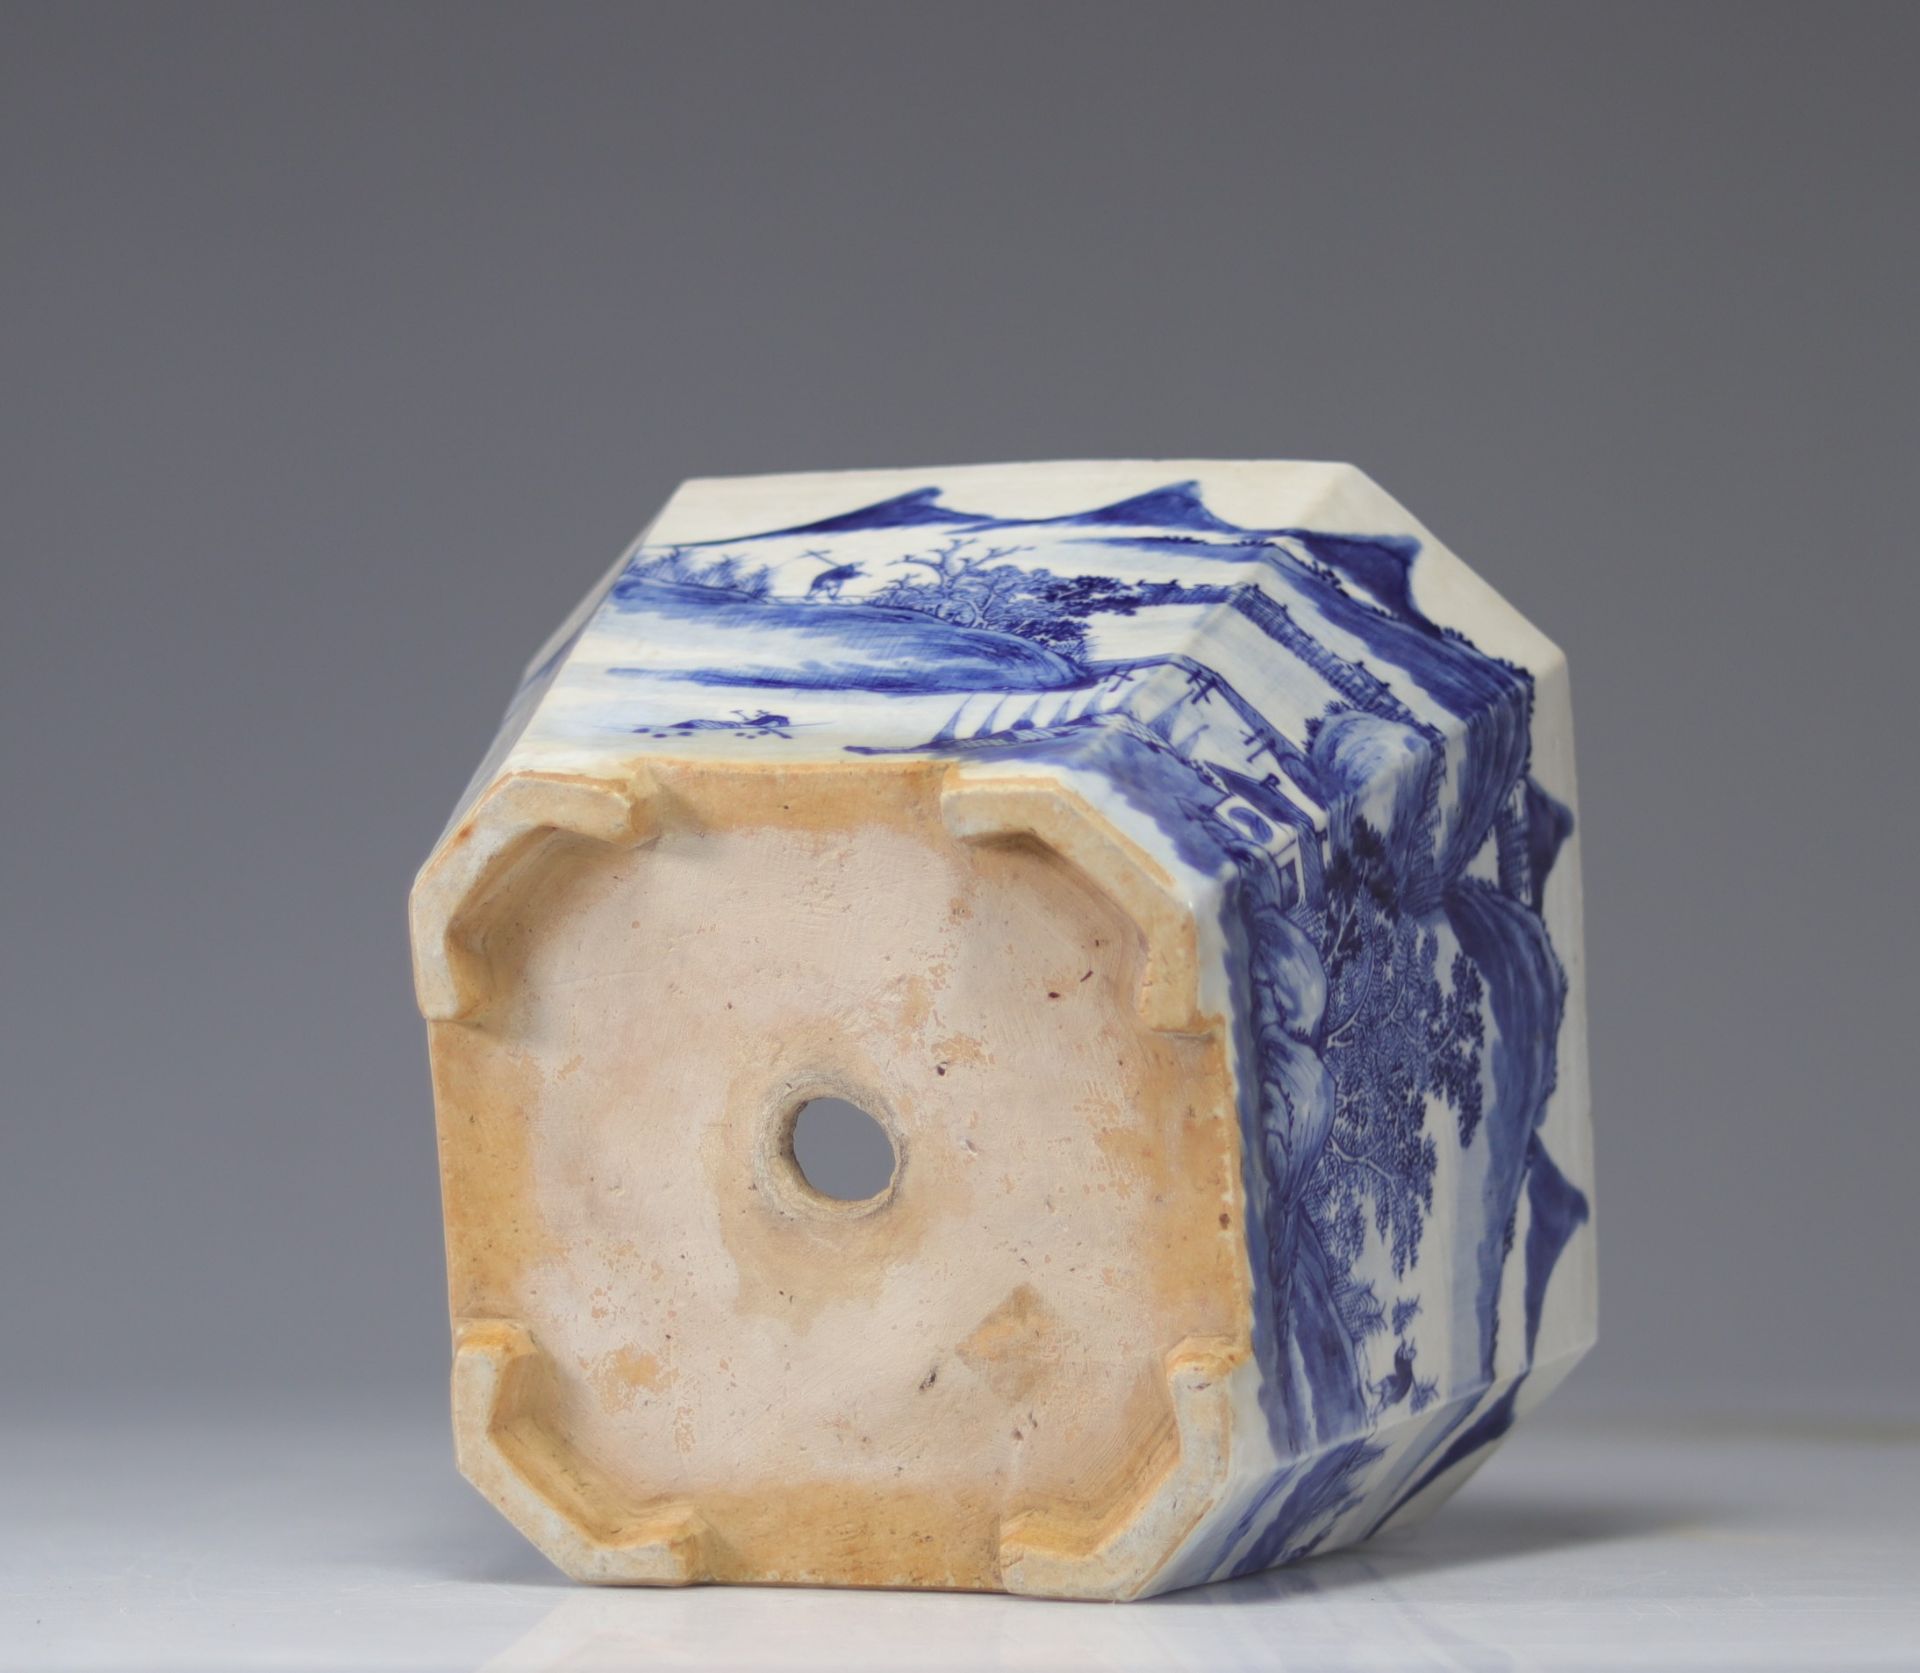 Blue white Chinese porcelain vase with Qing period landscape decoration - Image 6 of 6